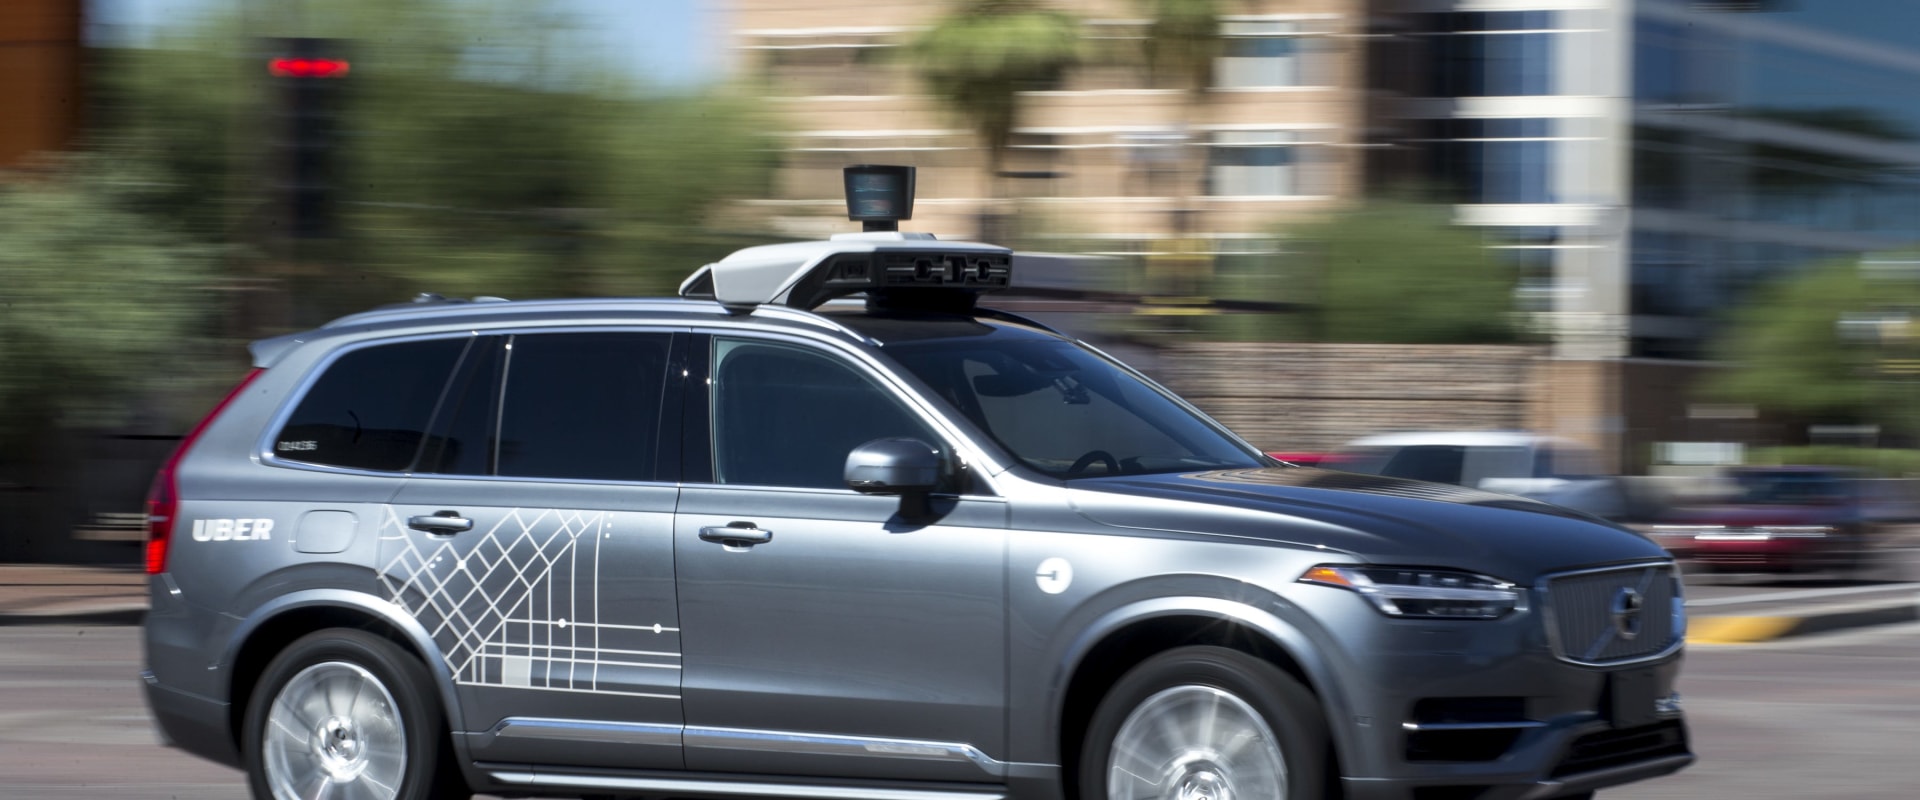 Reporting Uber Accidents in Arizona: Laws and Regulations